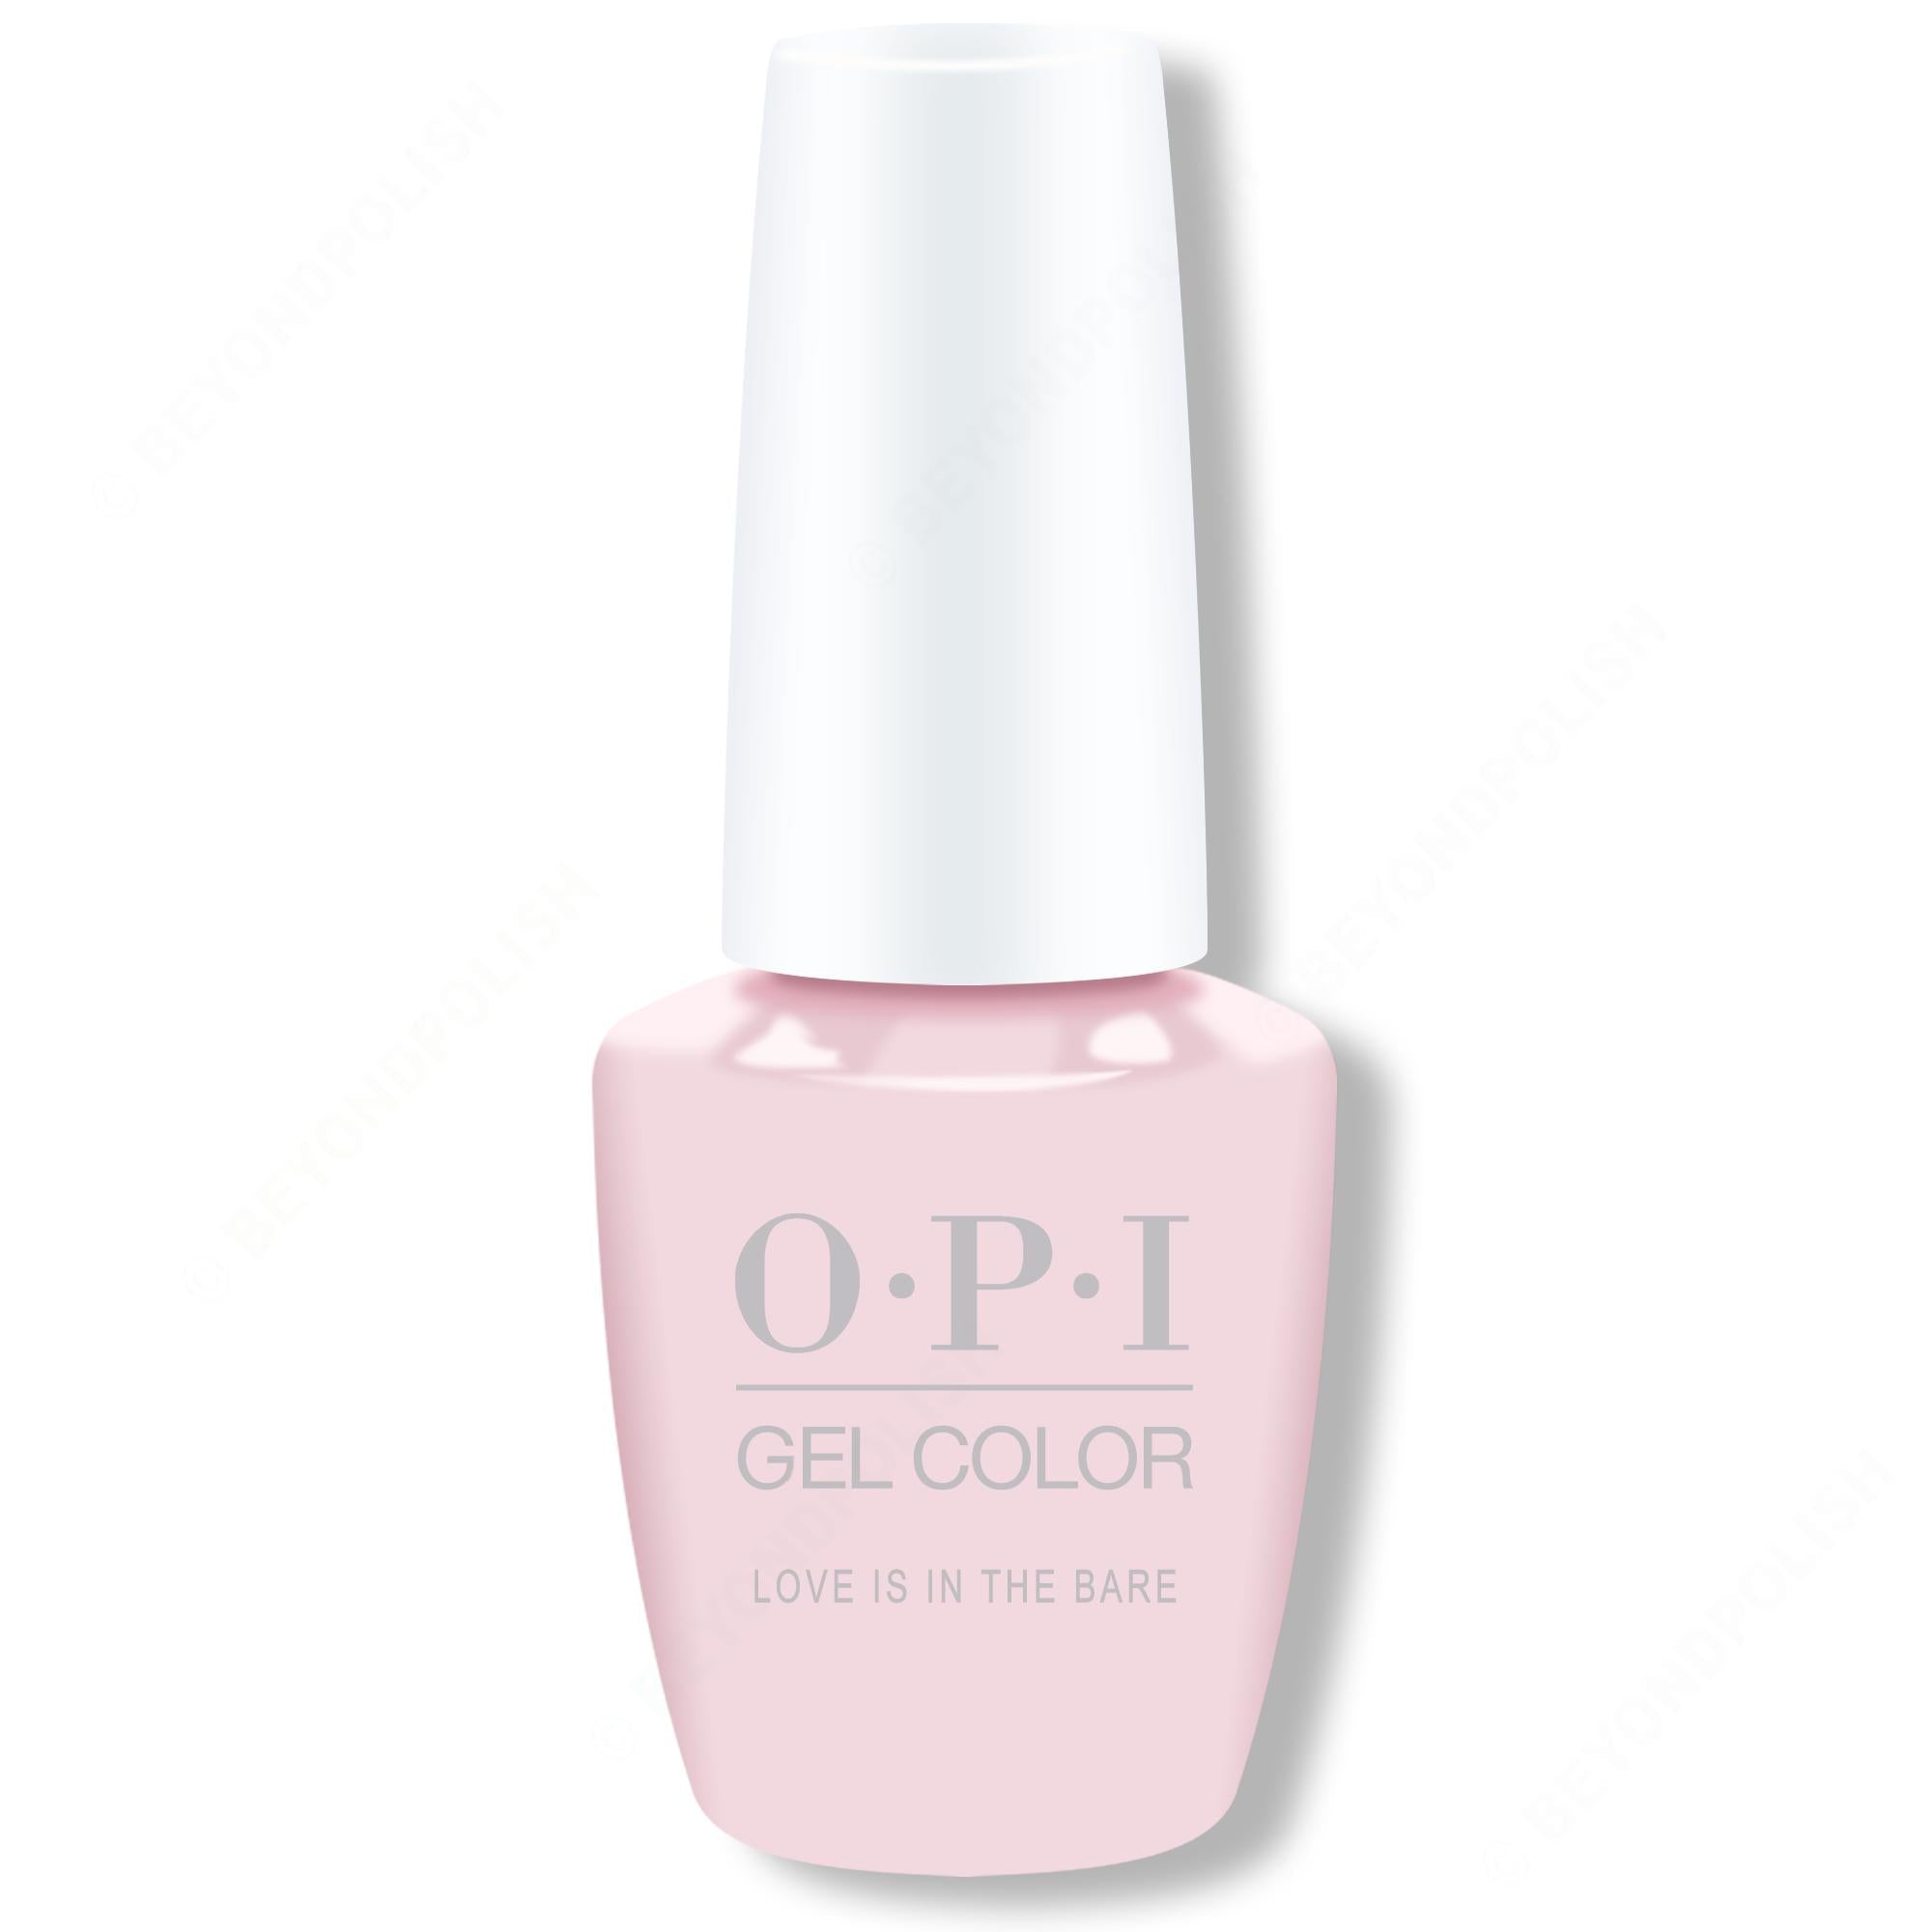 OPI GelColor - Love Is In The Bare 0.5 oz - #GCT69 - Gel Polish at Beyond Polish